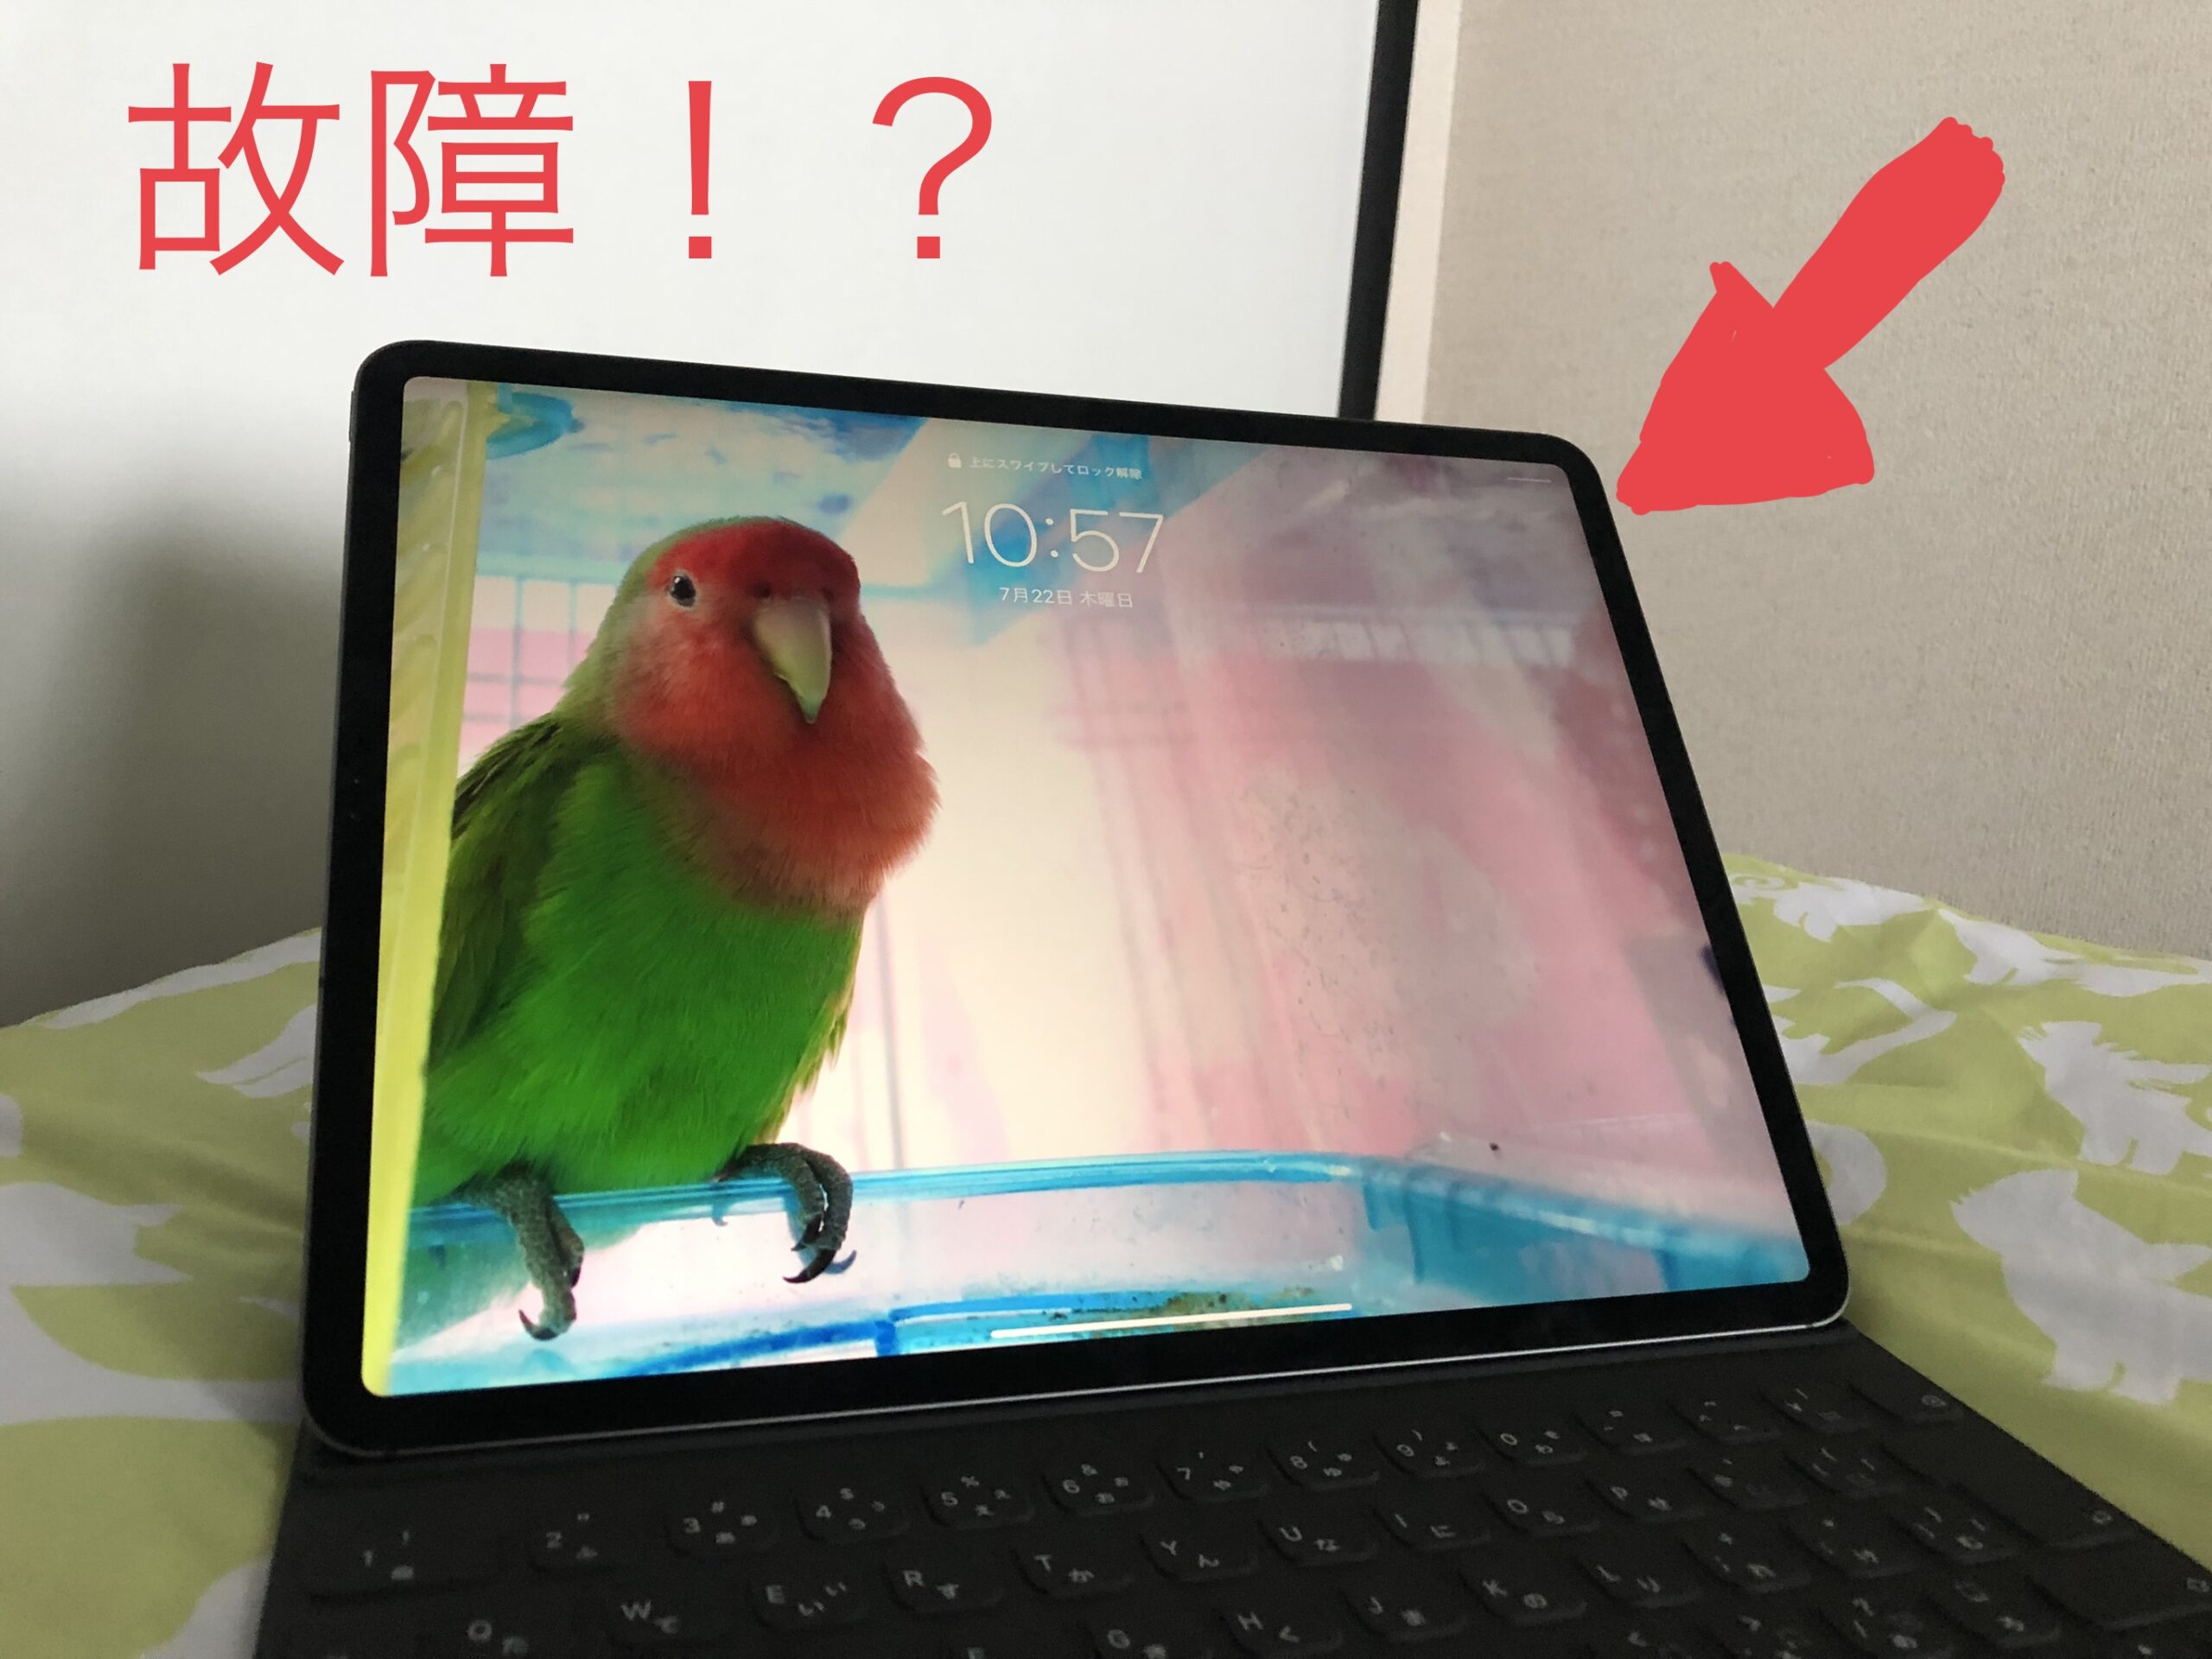 You are currently viewing 【問題発生】愛用しているiPad Proが充電を受け付けなくなった→直った